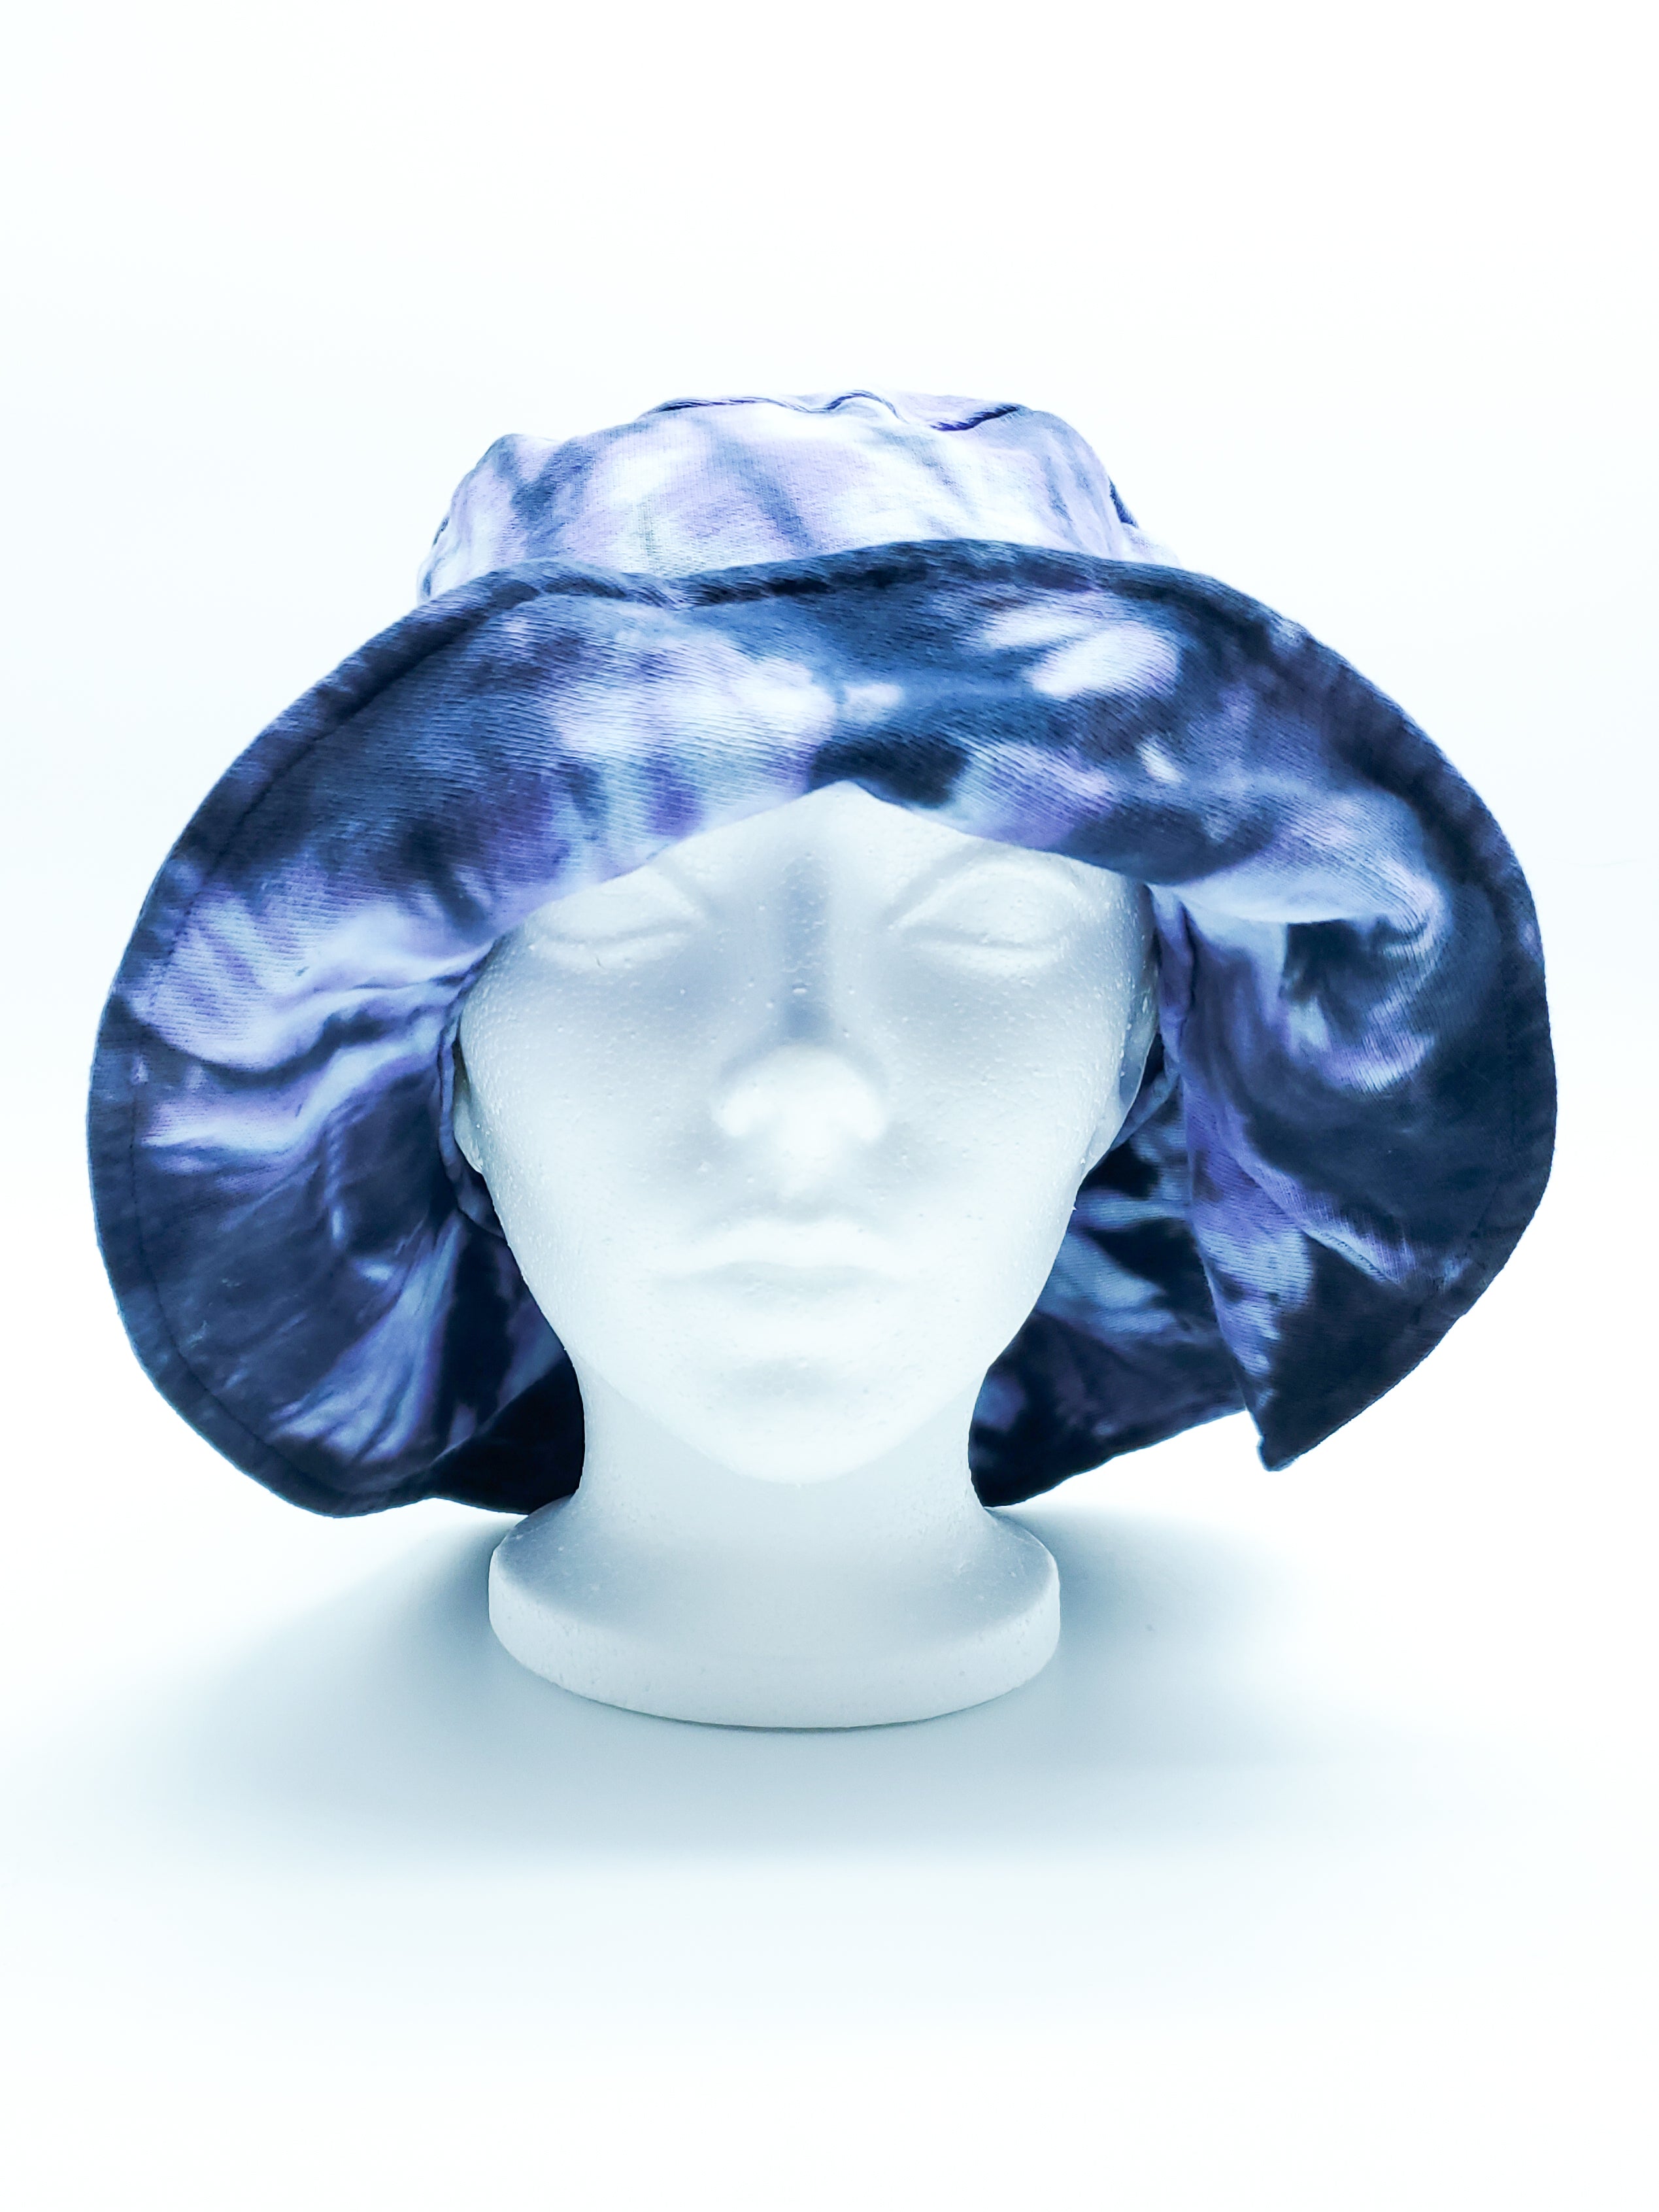 Purple and Black Tie Dyed Floppy Hat (Adult, O/S) - The Caffeinated Raven